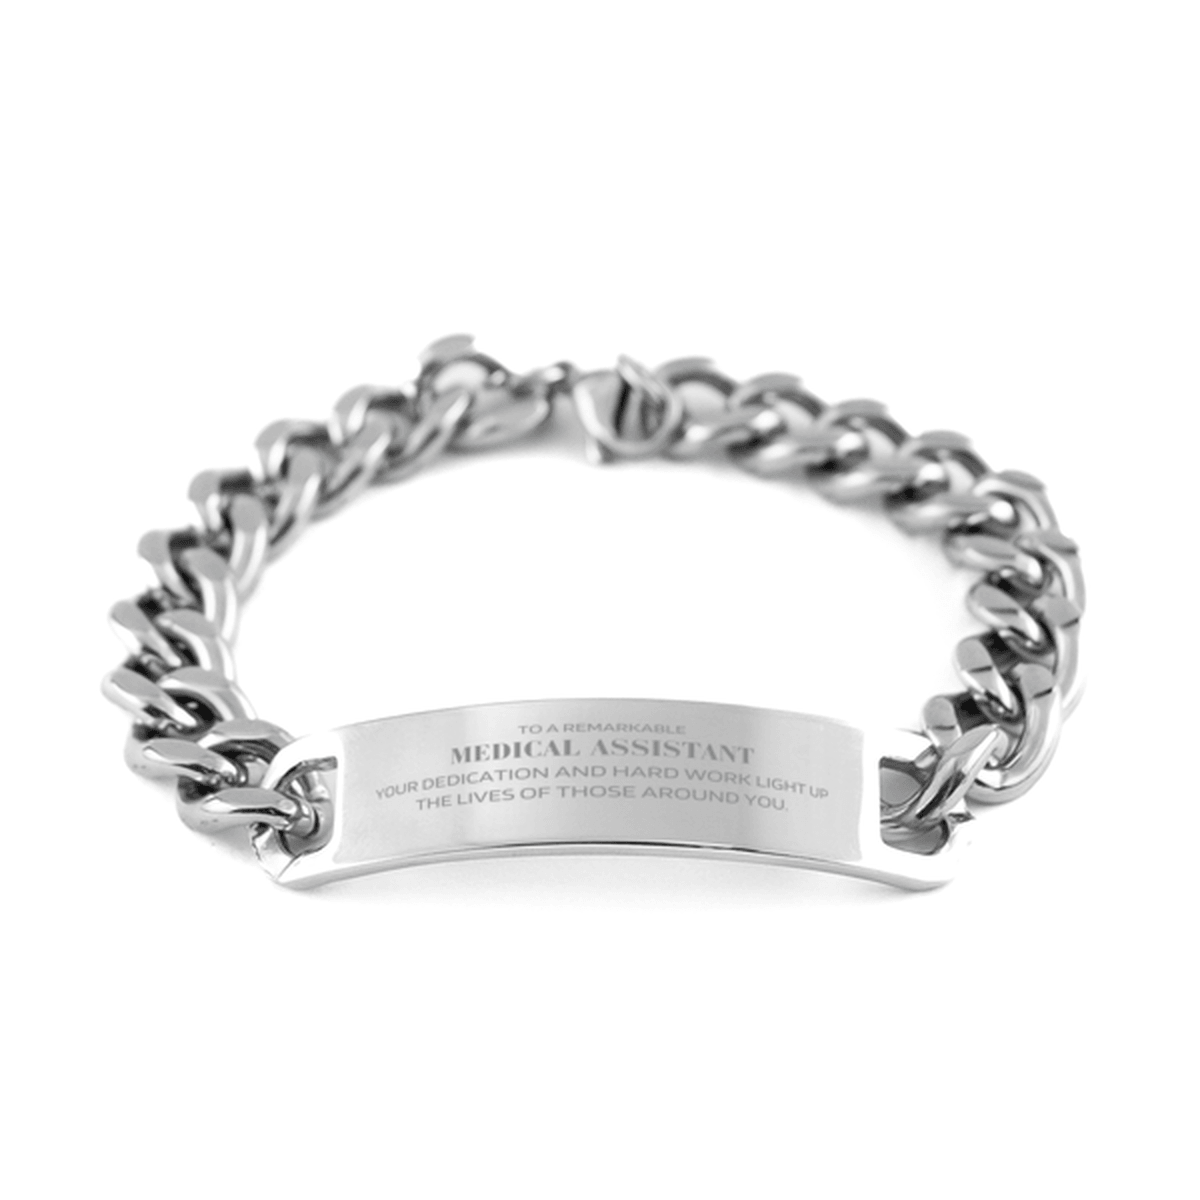 Remarkable Medical Assistant Gifts, Your dedication and hard work, Inspirational Birthday Christmas Unique Cuban Chain Stainless Steel Bracelet For Medical Assistant, Coworkers, Men, Women, Friends - Mallard Moon Gift Shop